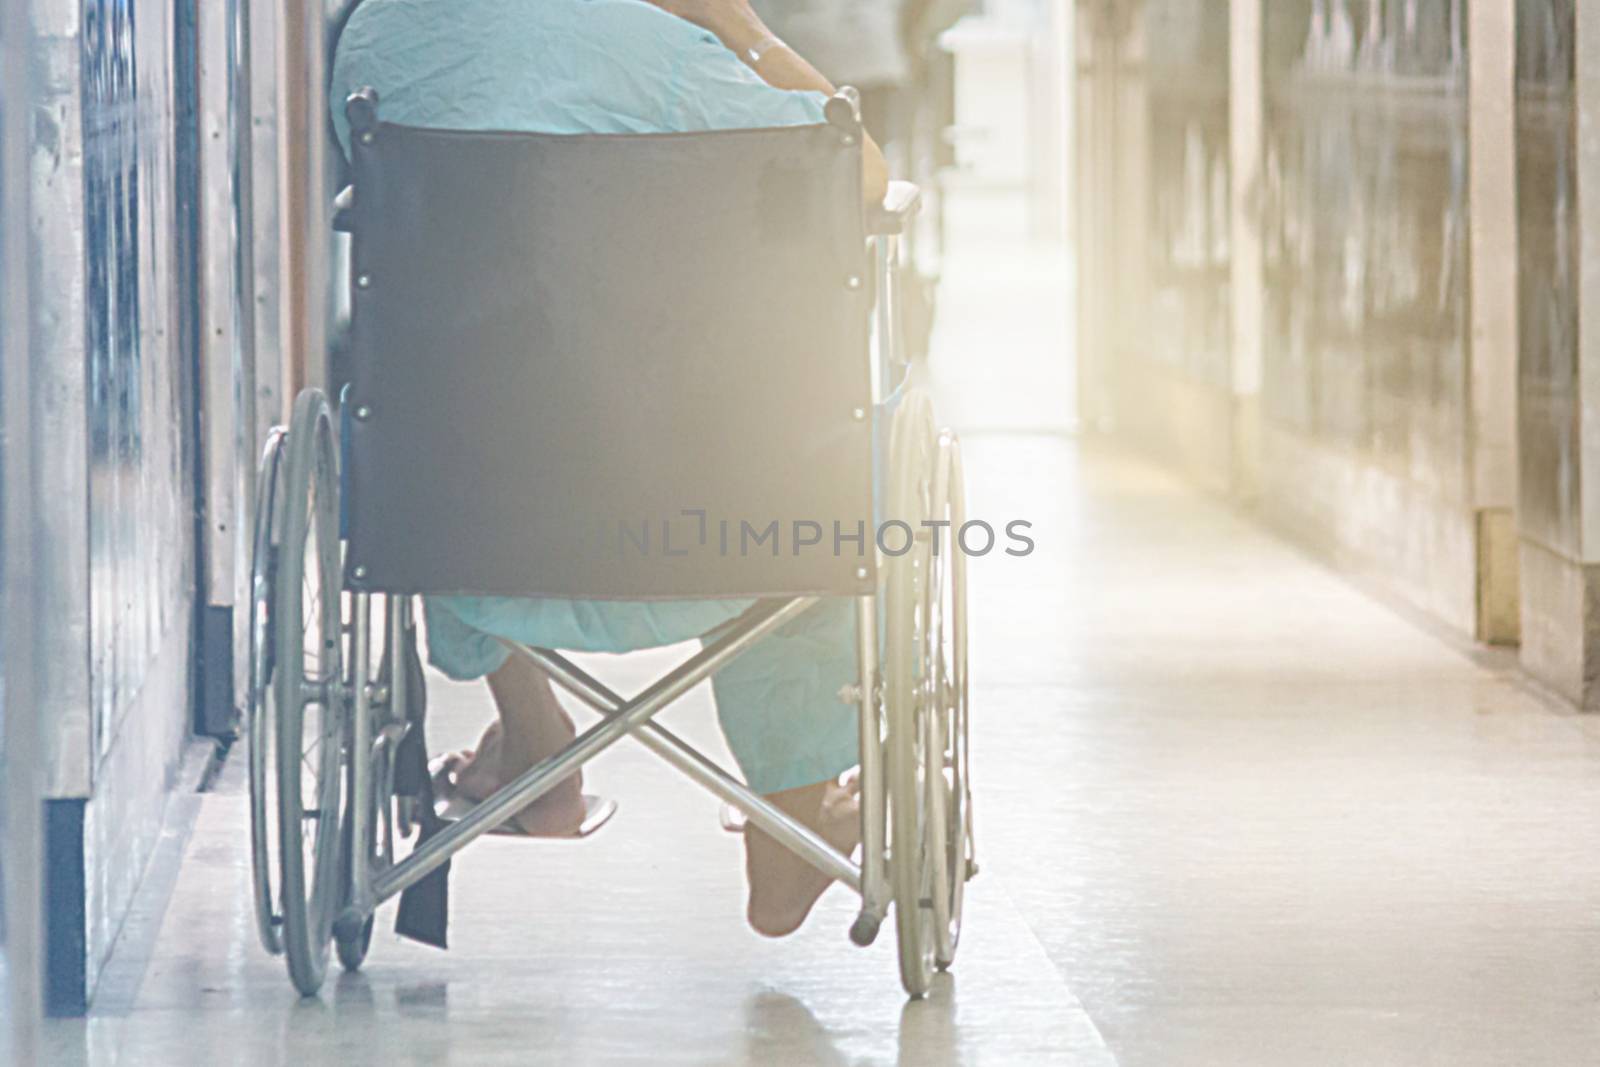 Abstract Of Man On Wheelchair In Front Of The Outpatient Departm by rakoptonLPN